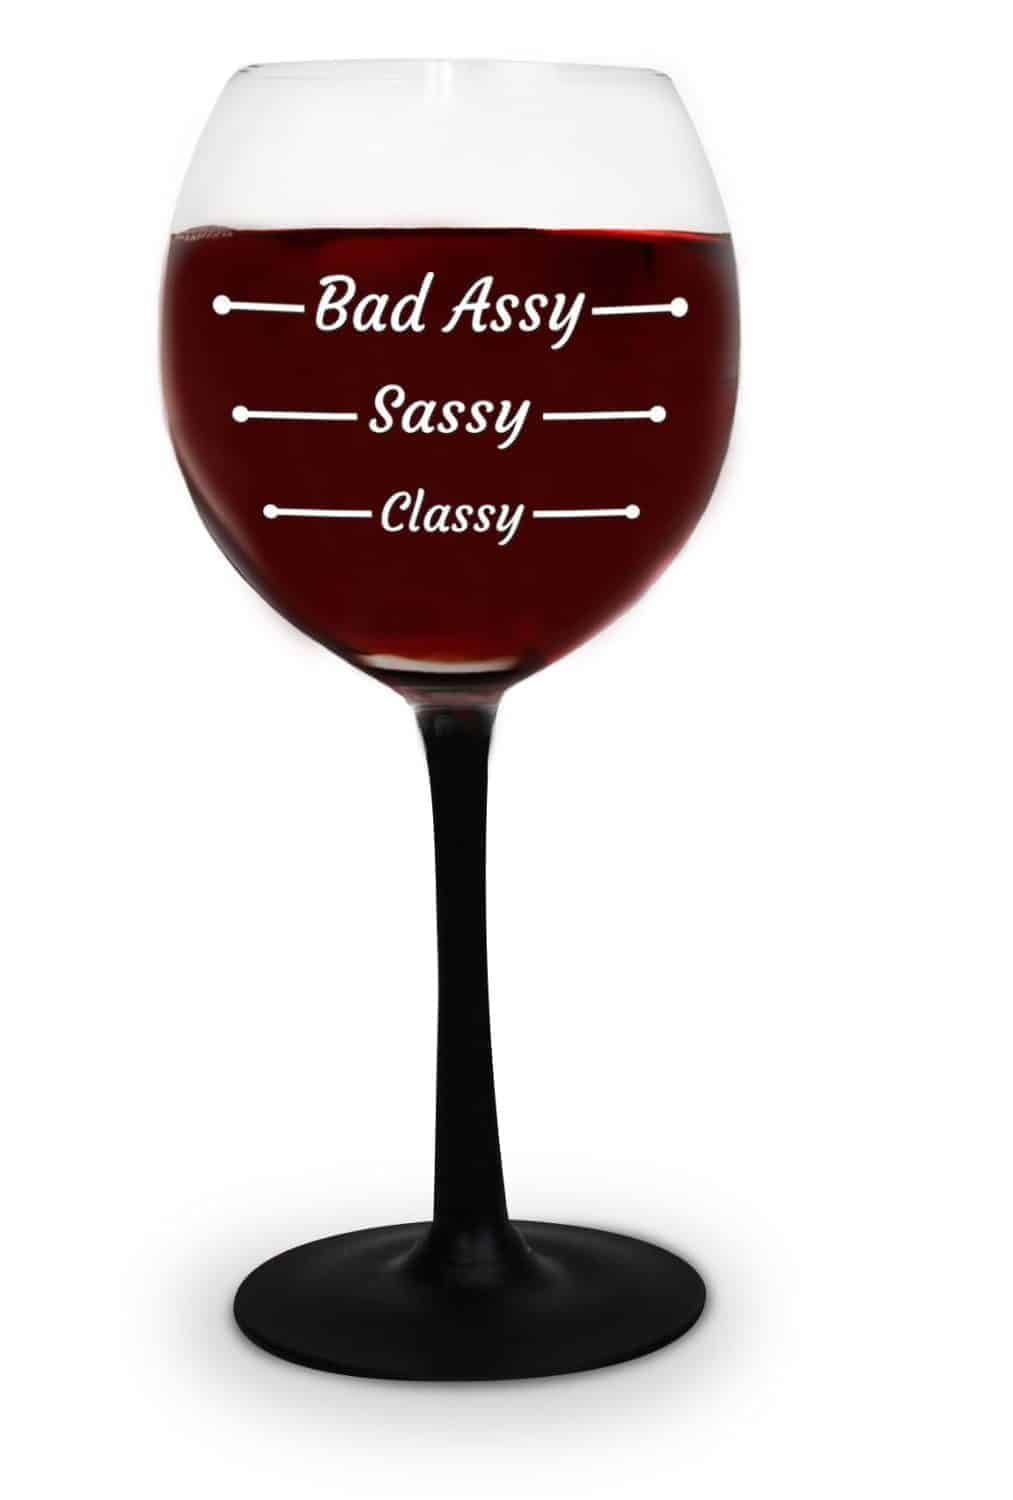 13 Funny Wine Glasses That Will Make You Smile!